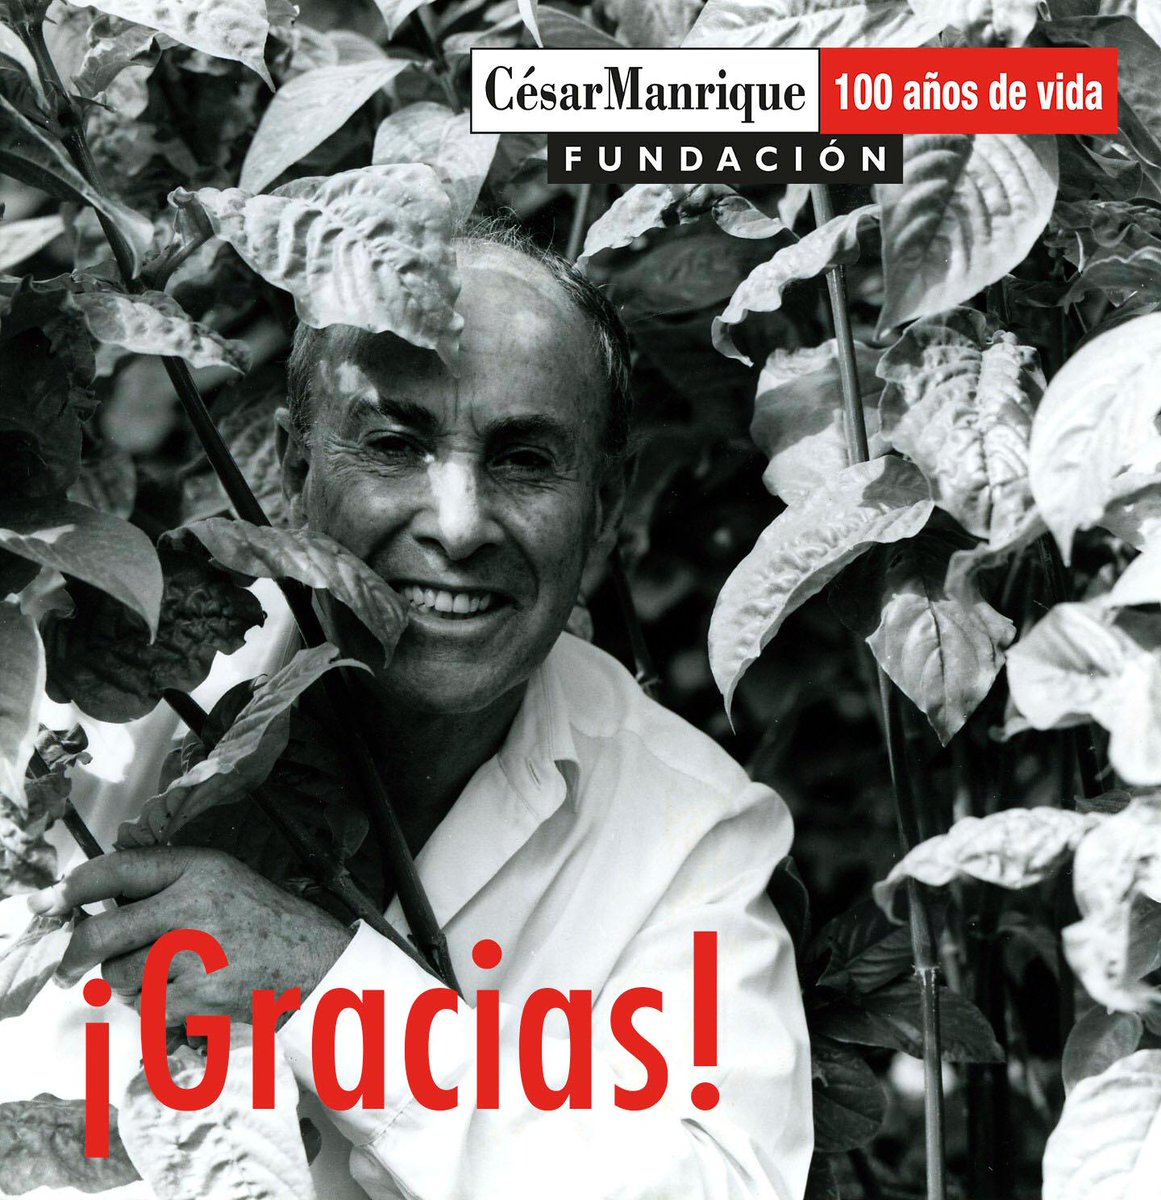 101 years today... Happy Birthday #CesarManrique the epitome of #LanzaroteChic His legacy is extraordinary, not just in Lanzarote but globally. He predicted that nature would sooner or later reclaim what is theirs. Let's take care of our environment 💚